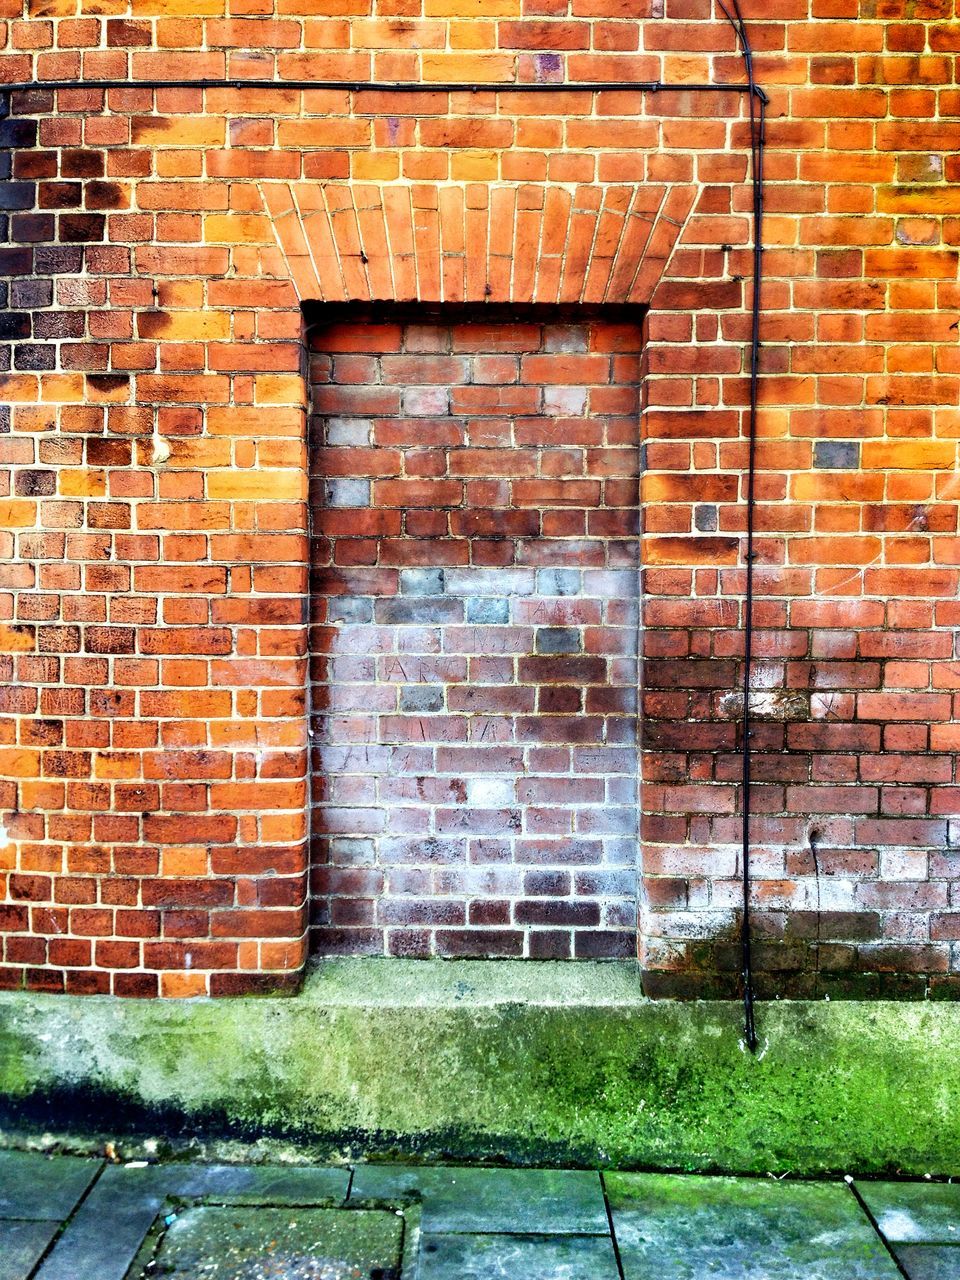 brick wall, built structure, architecture, building exterior, wall - building feature, weathered, wall, window, outdoors, brick, house, old, stone wall, no people, day, grass, closed, pattern, abandoned, damaged